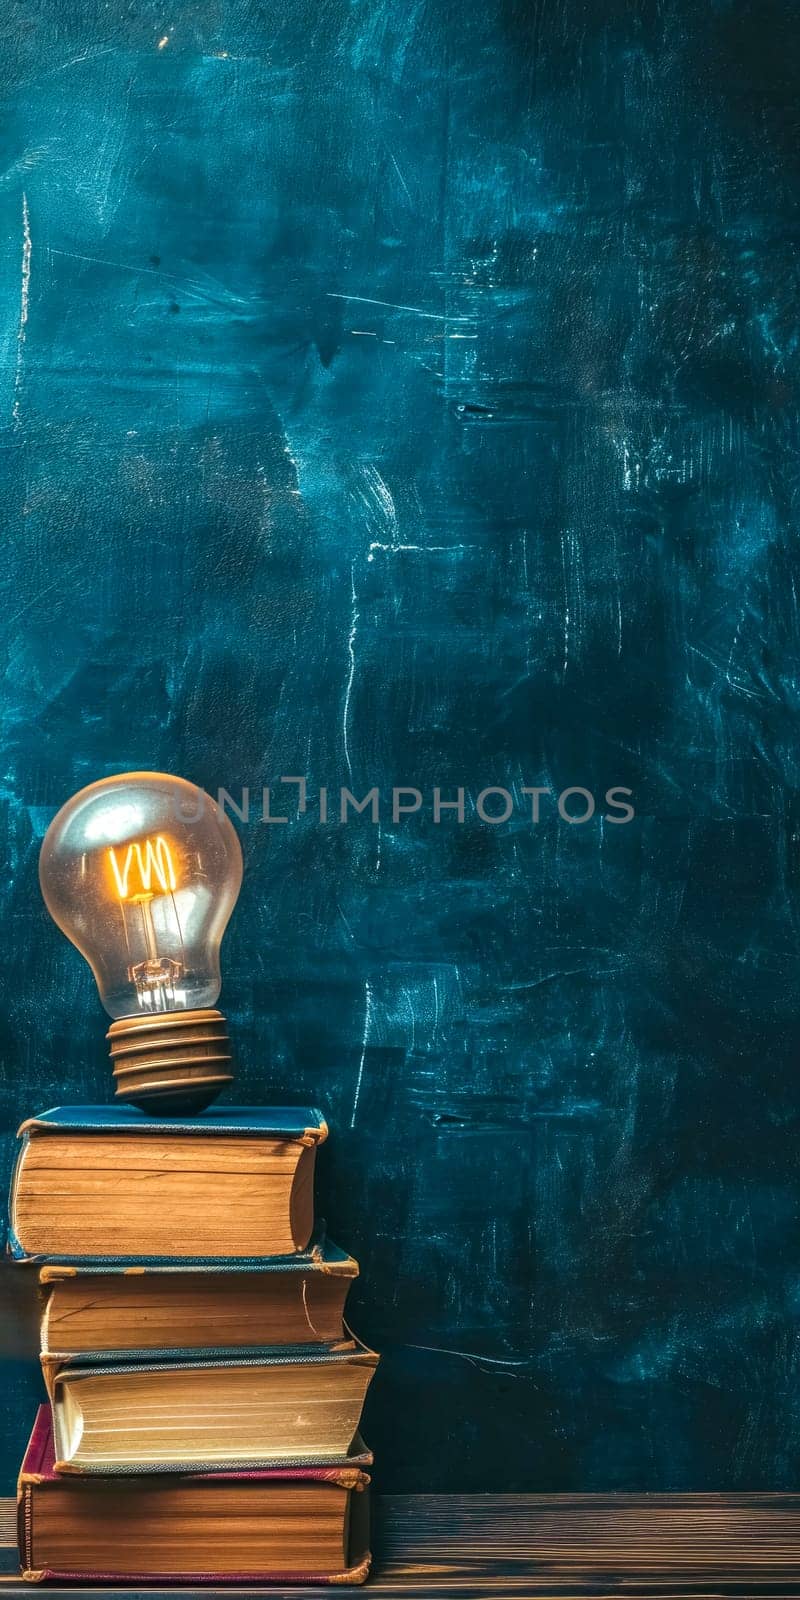 concept of inspiration and knowledge, featuring a glowing light bulb atop a stack of old books against a textured teal backdrop. vertical, copy space